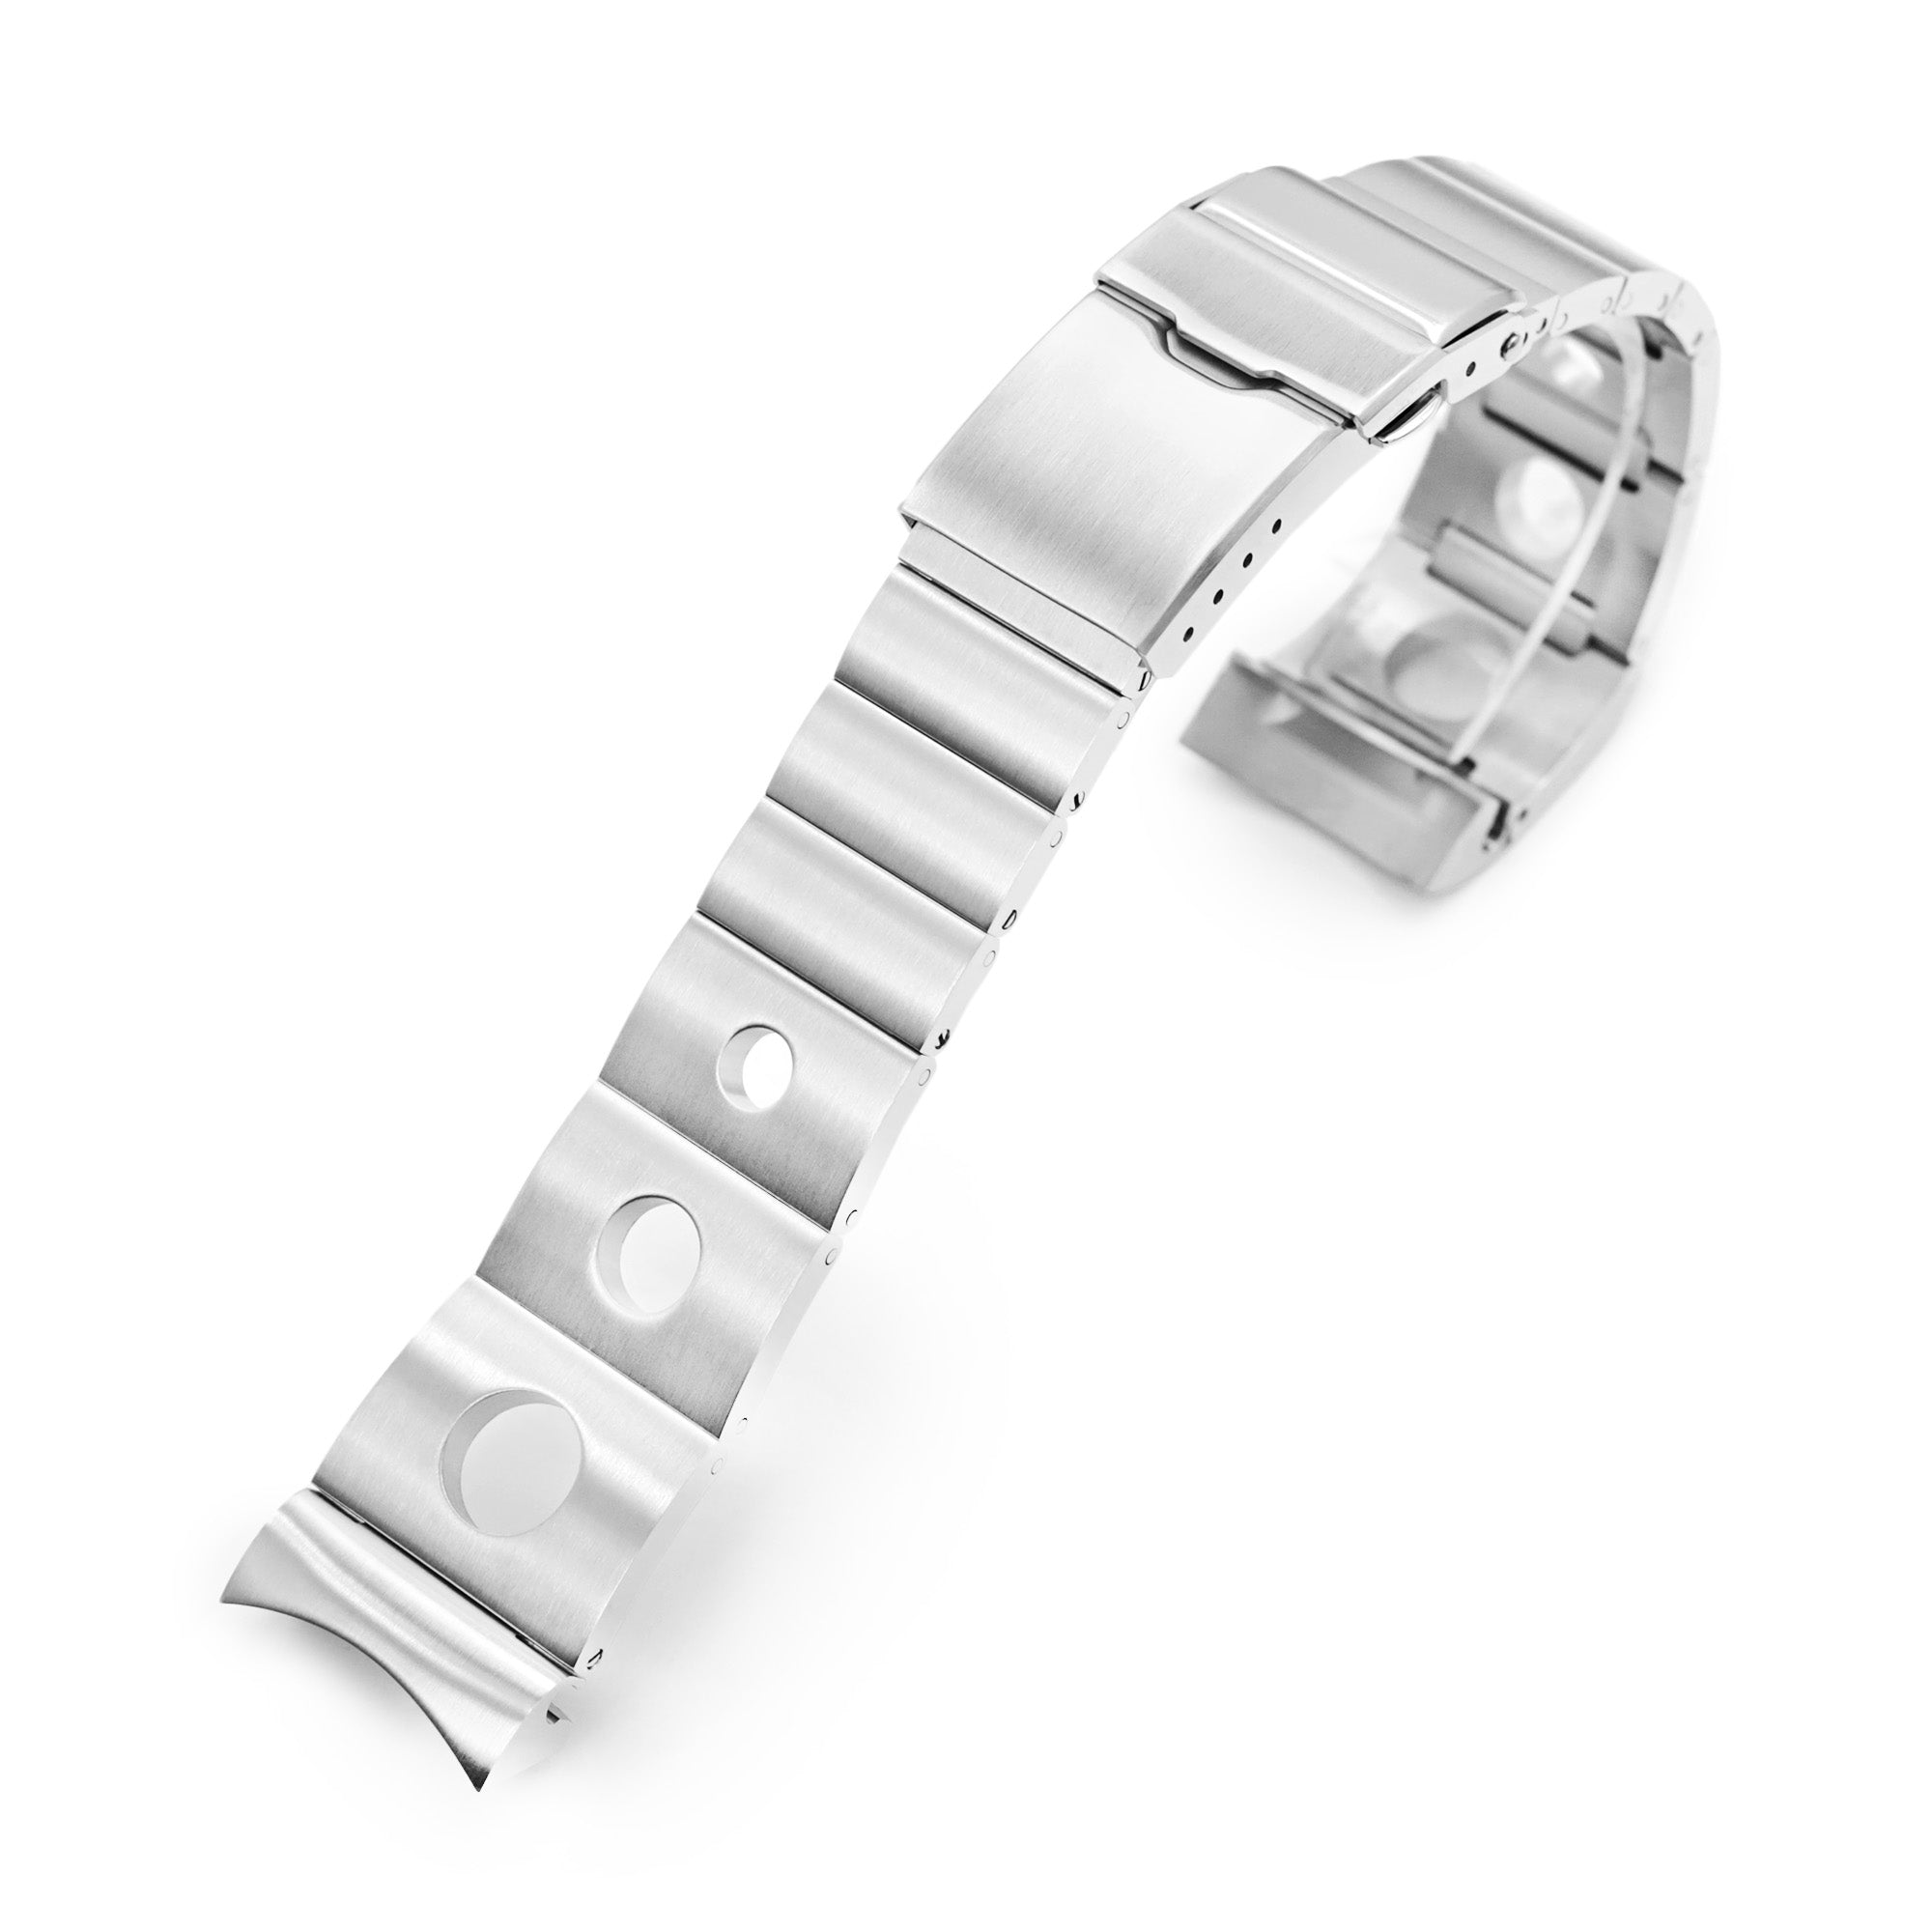 22mm Rollball version II Watch Band for Seiko 5 Sports 42.5mm, 316L Stainless Steel Brushed Baton Diver Clasp Strapcode Watch Bands